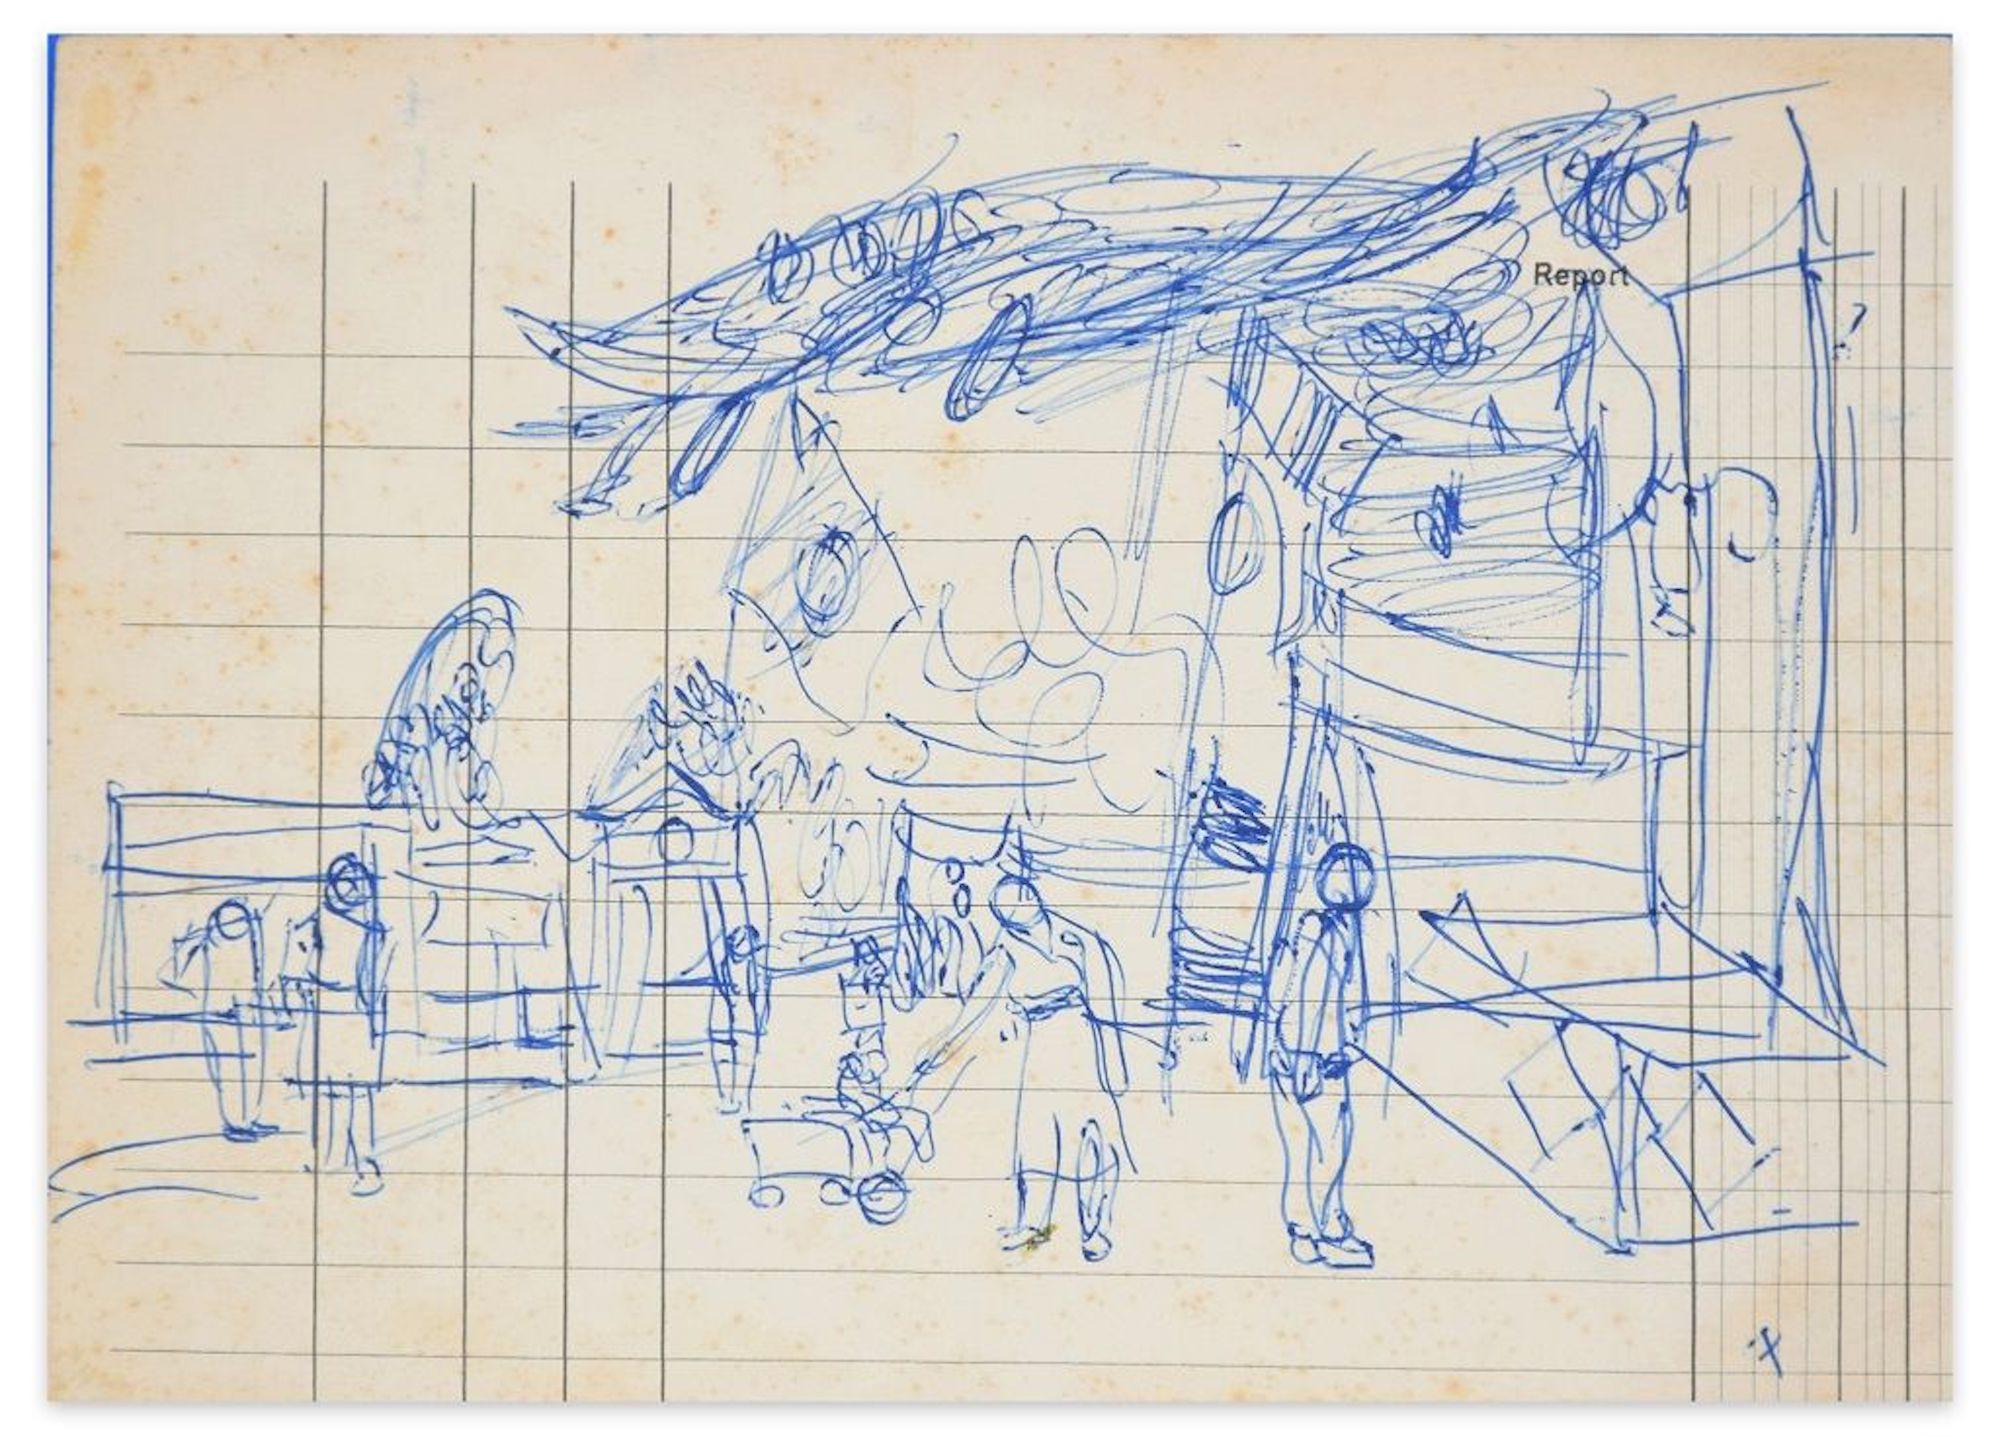 Lunapark is a wonderful blue ink original drawing realized on an accounting paper by the artist Jeanne Daour (1914-?).

With the typical rapidity of a sketched drawing, this modern artwork represents a joyful scene of mothers and sons in a luna park